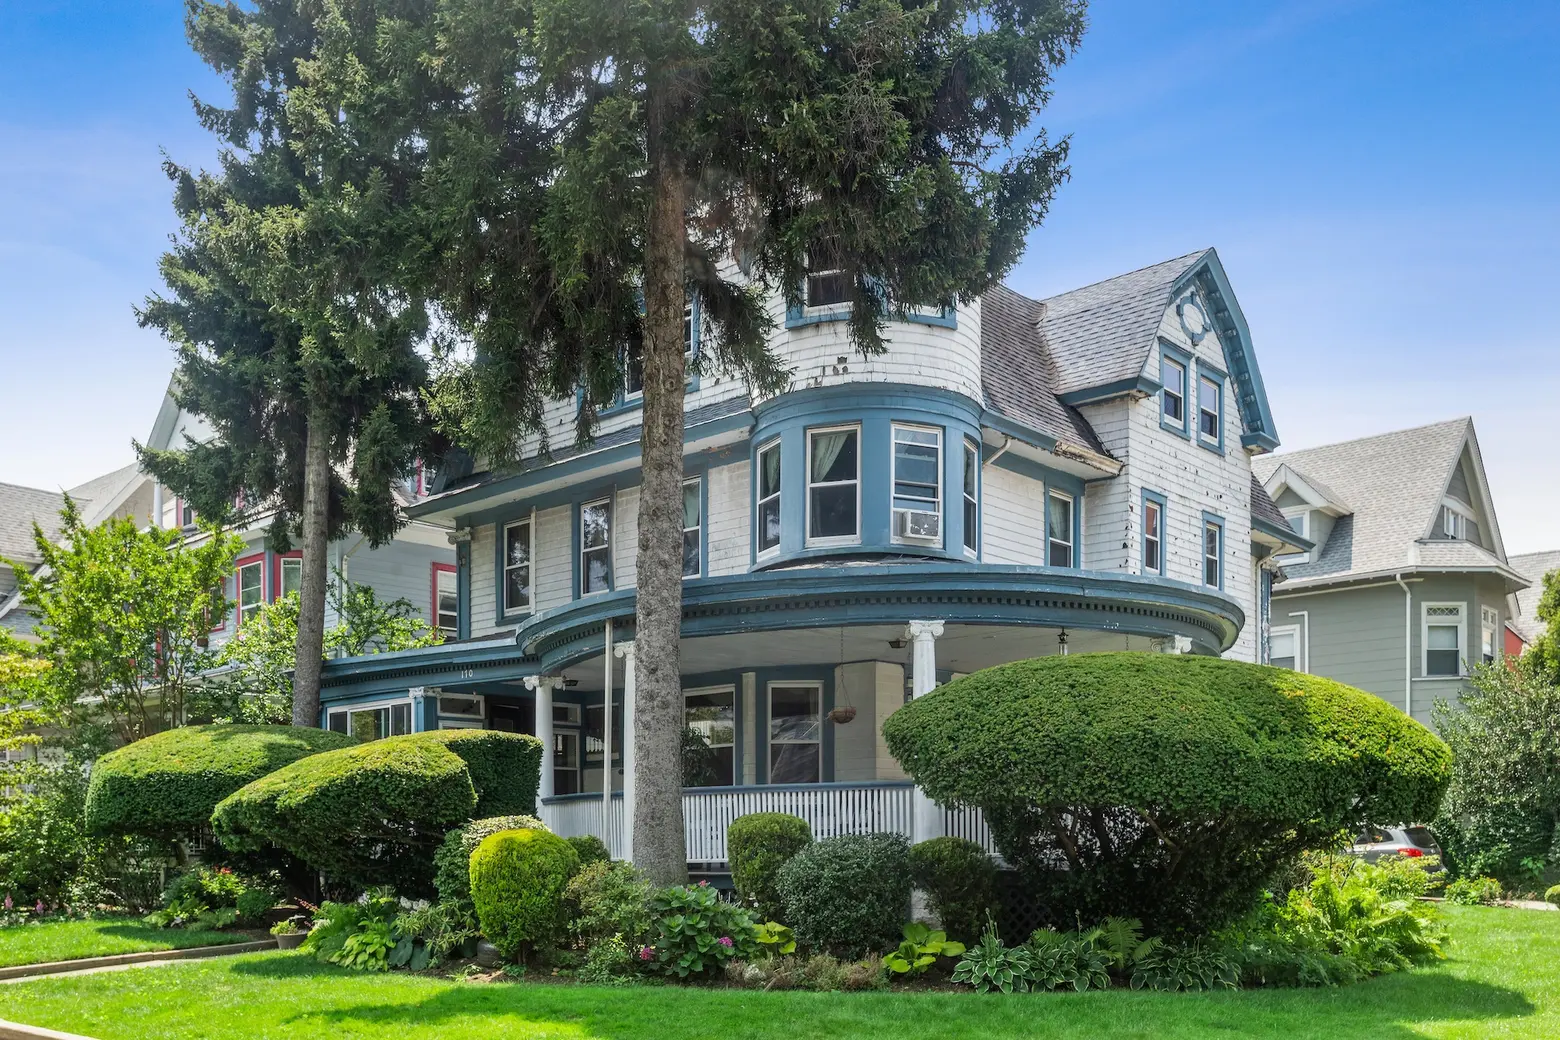 For $2.5M, this Victorian Prospect Park South house has seven bedrooms and a wraparound porch